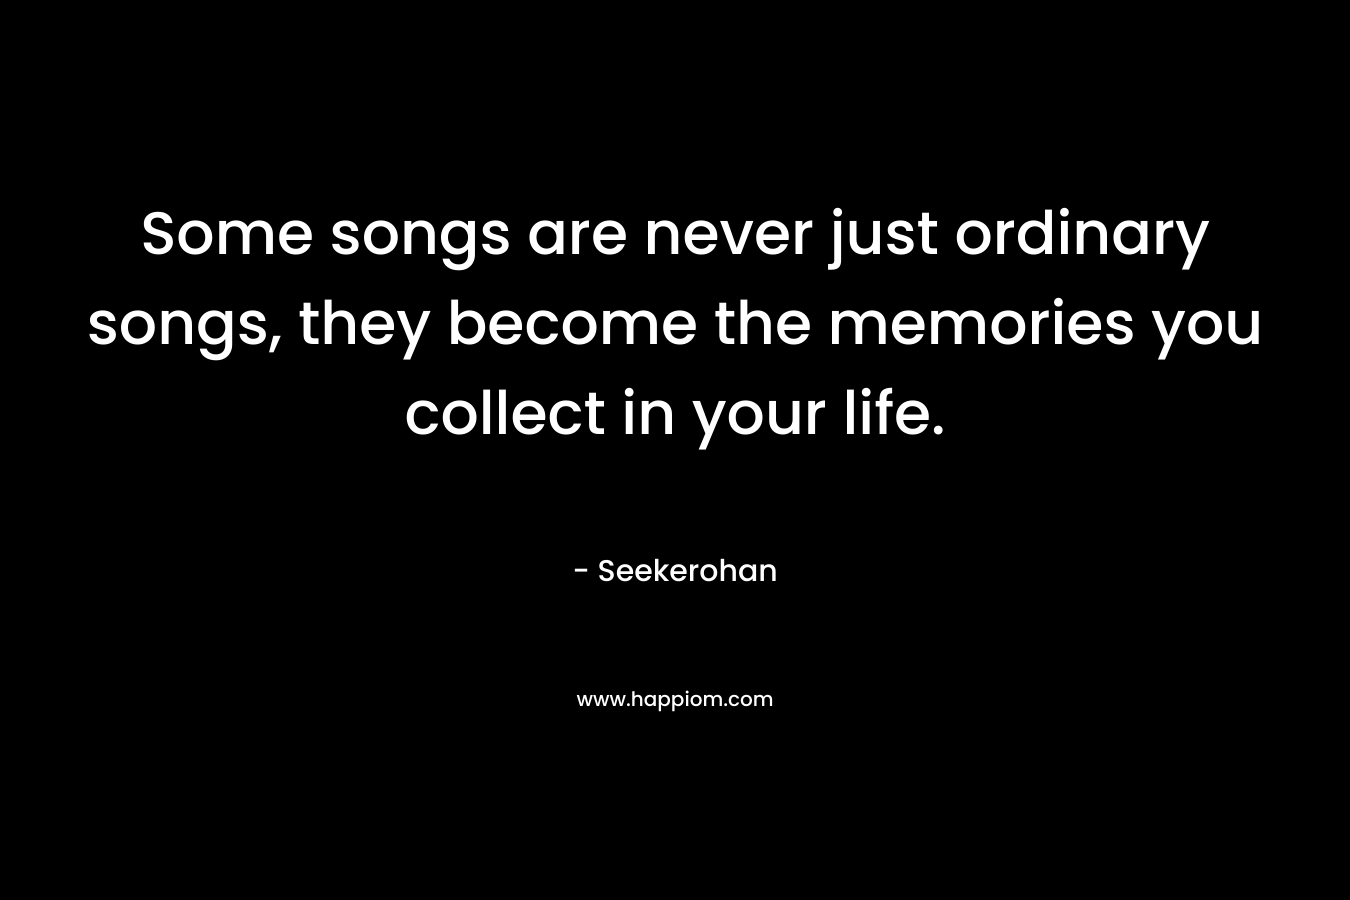 Some songs are never just ordinary songs, they become the memories you collect in your life.